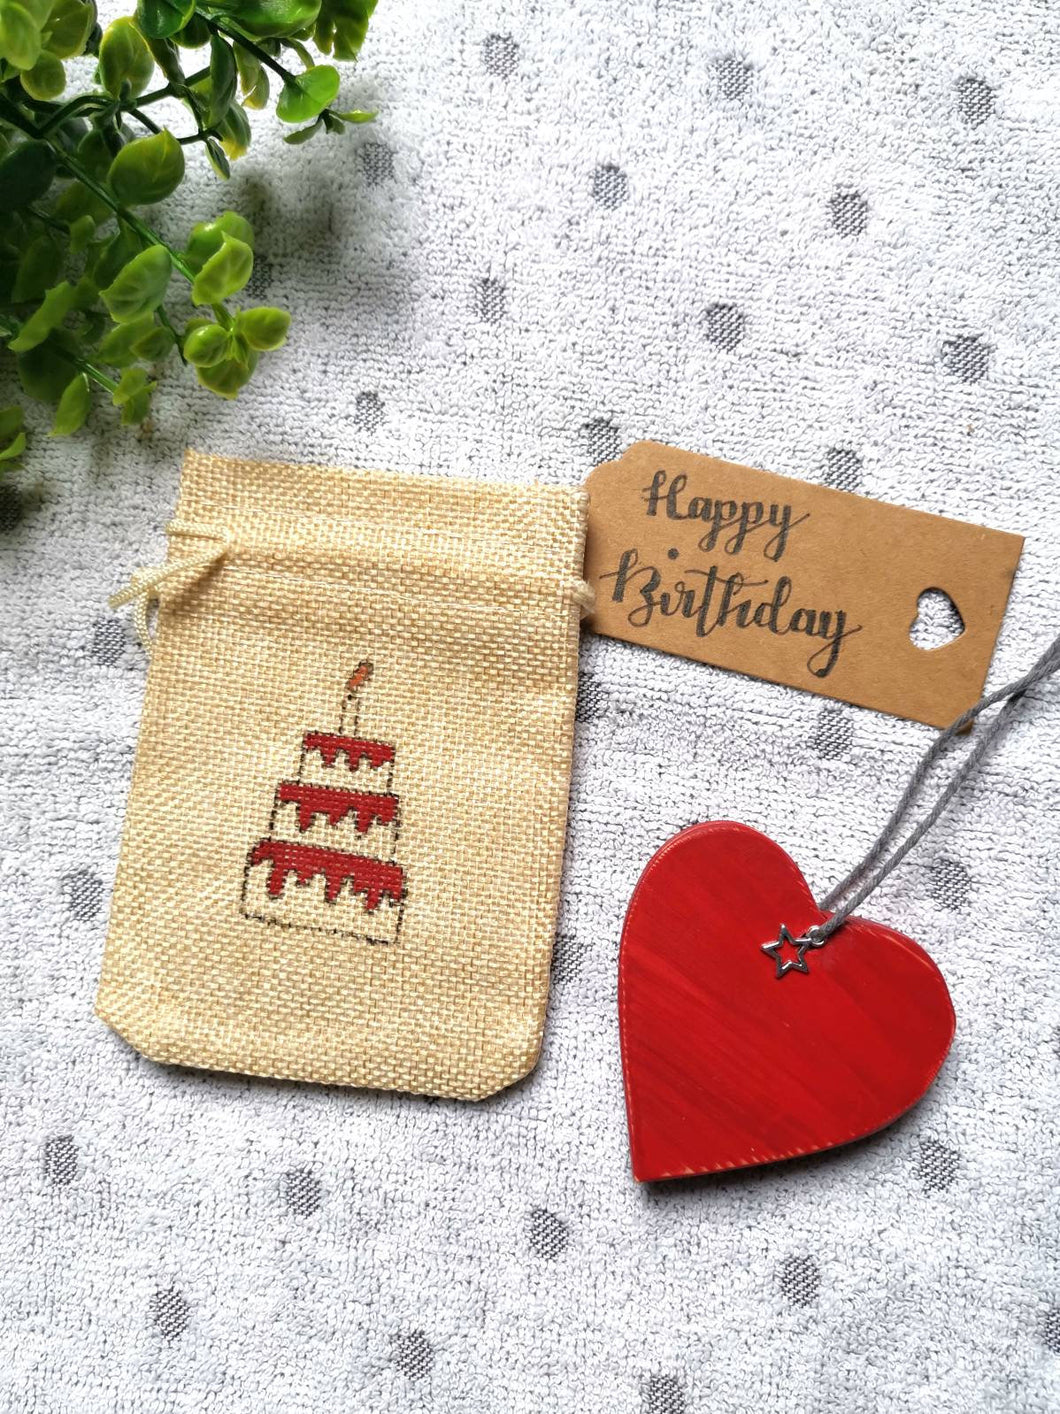 Birthday Gift lockdown, Letterbox gift, Treat bag with wooden heart,